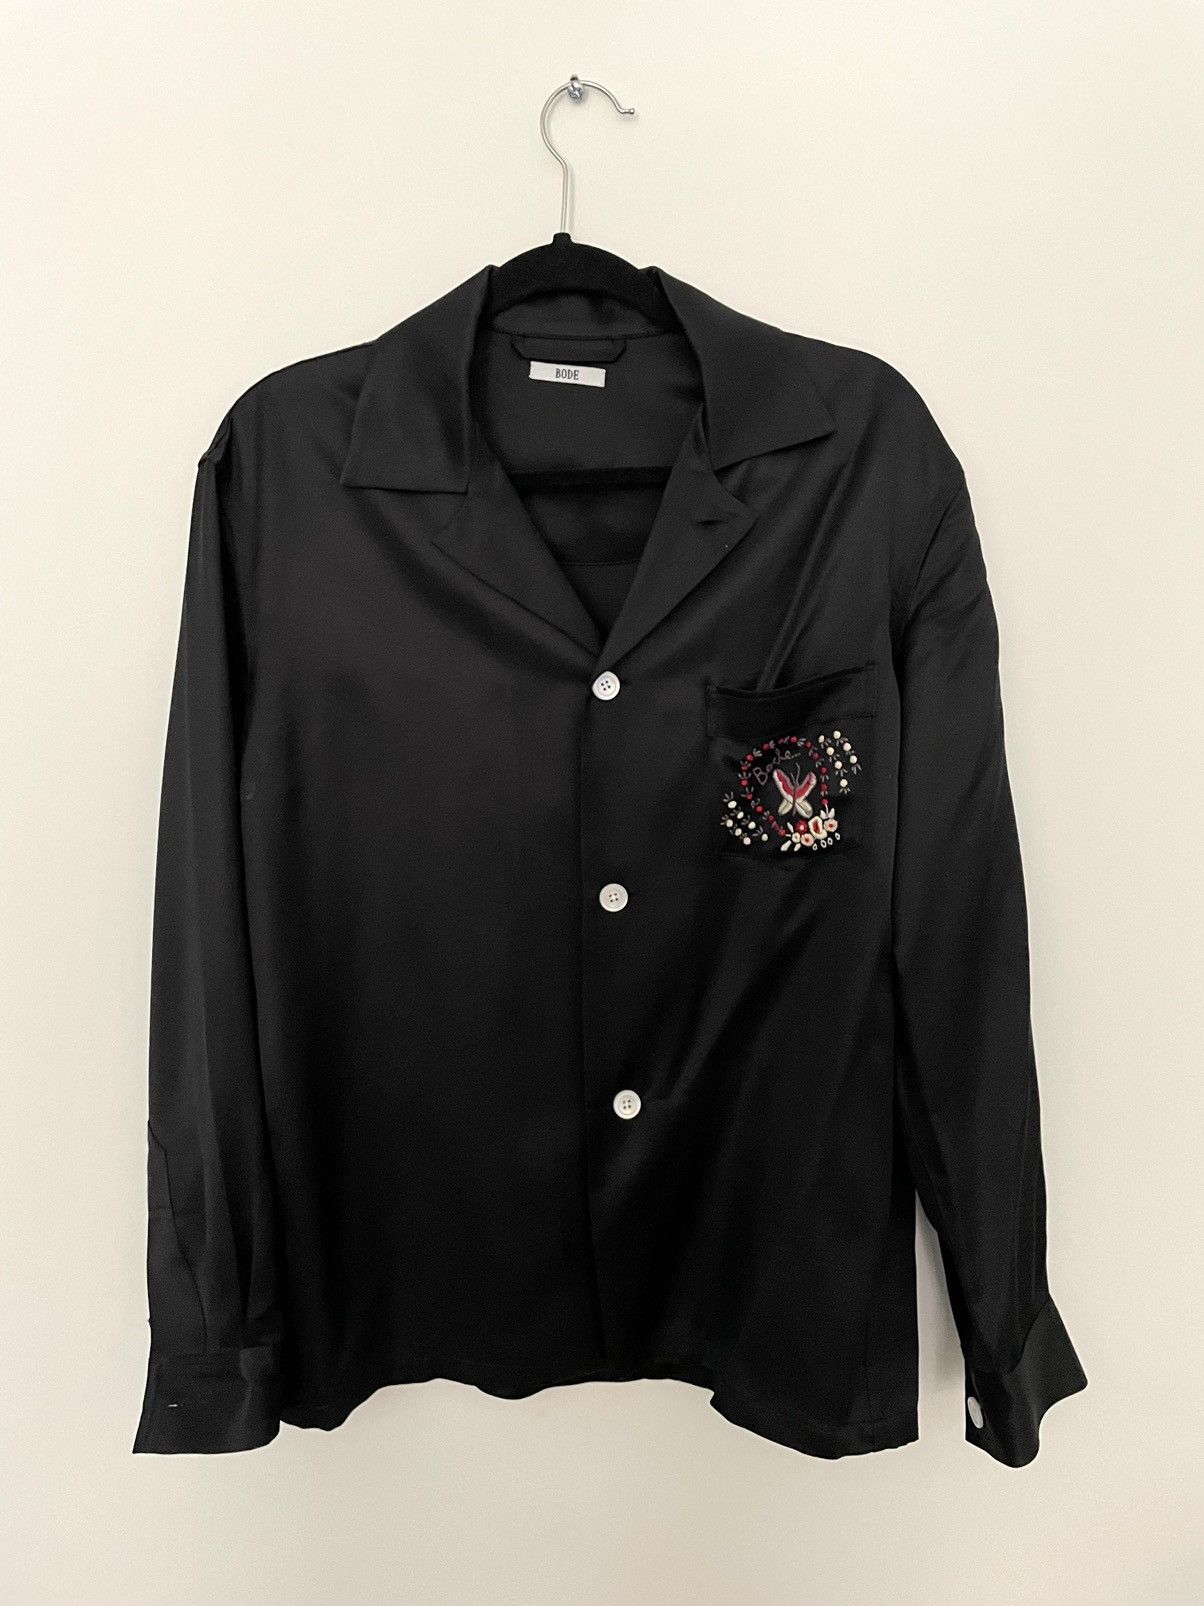 Bode Embroidered Leafwing Silk Bode Shirt | Grailed